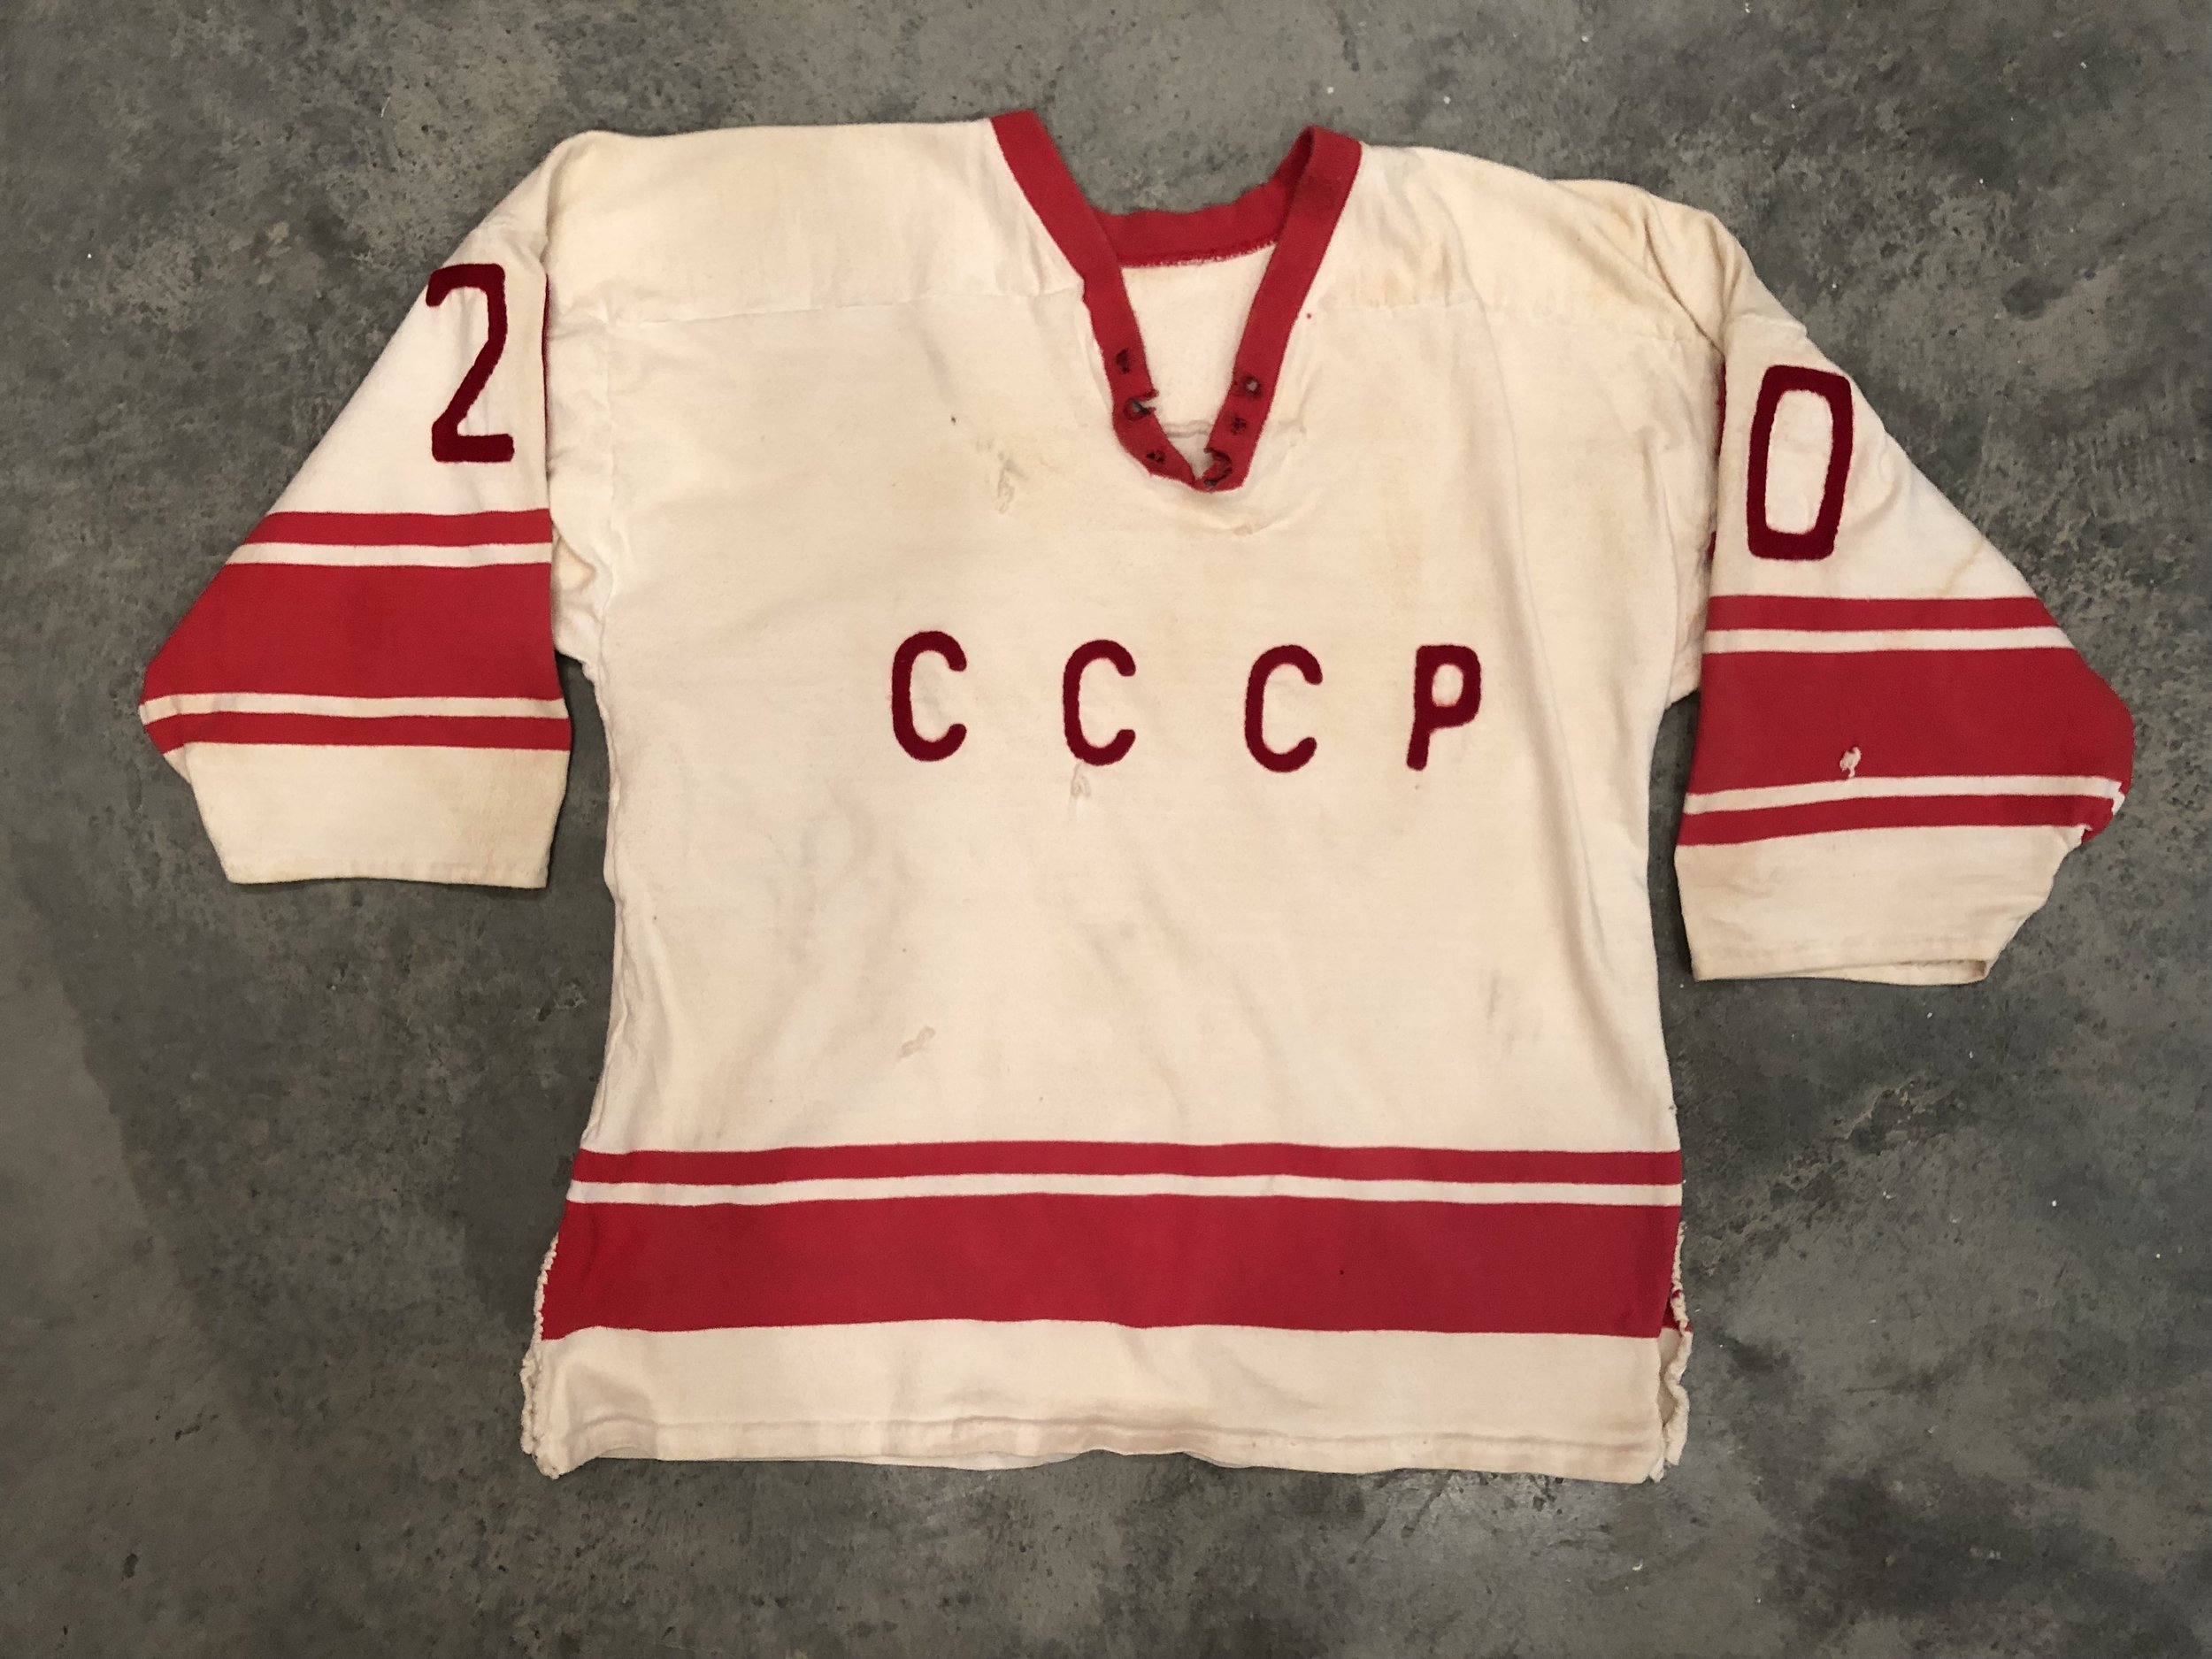 1972 USSR Olympic Hockey Team Jersey. Hockey Collectibles, Lot #82528